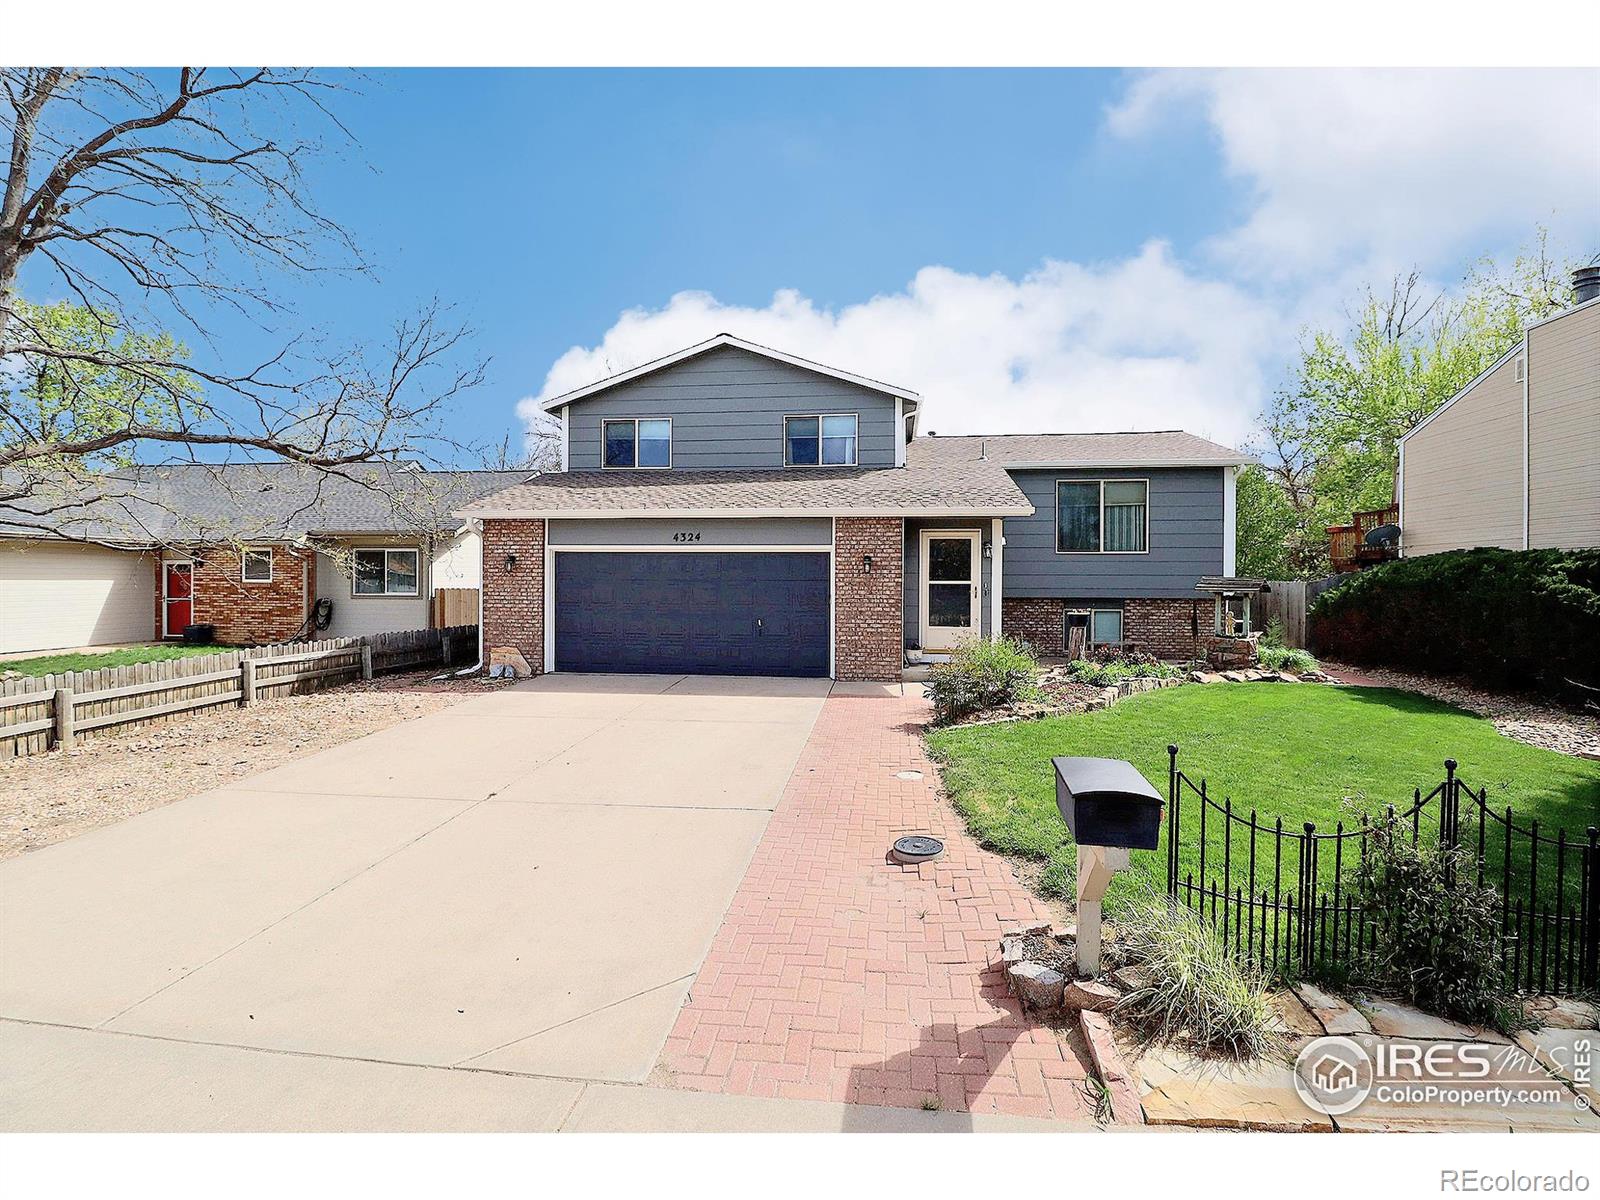 4324  23rd street, greeley sold home. Closed on 2024-05-28 for $444,000.